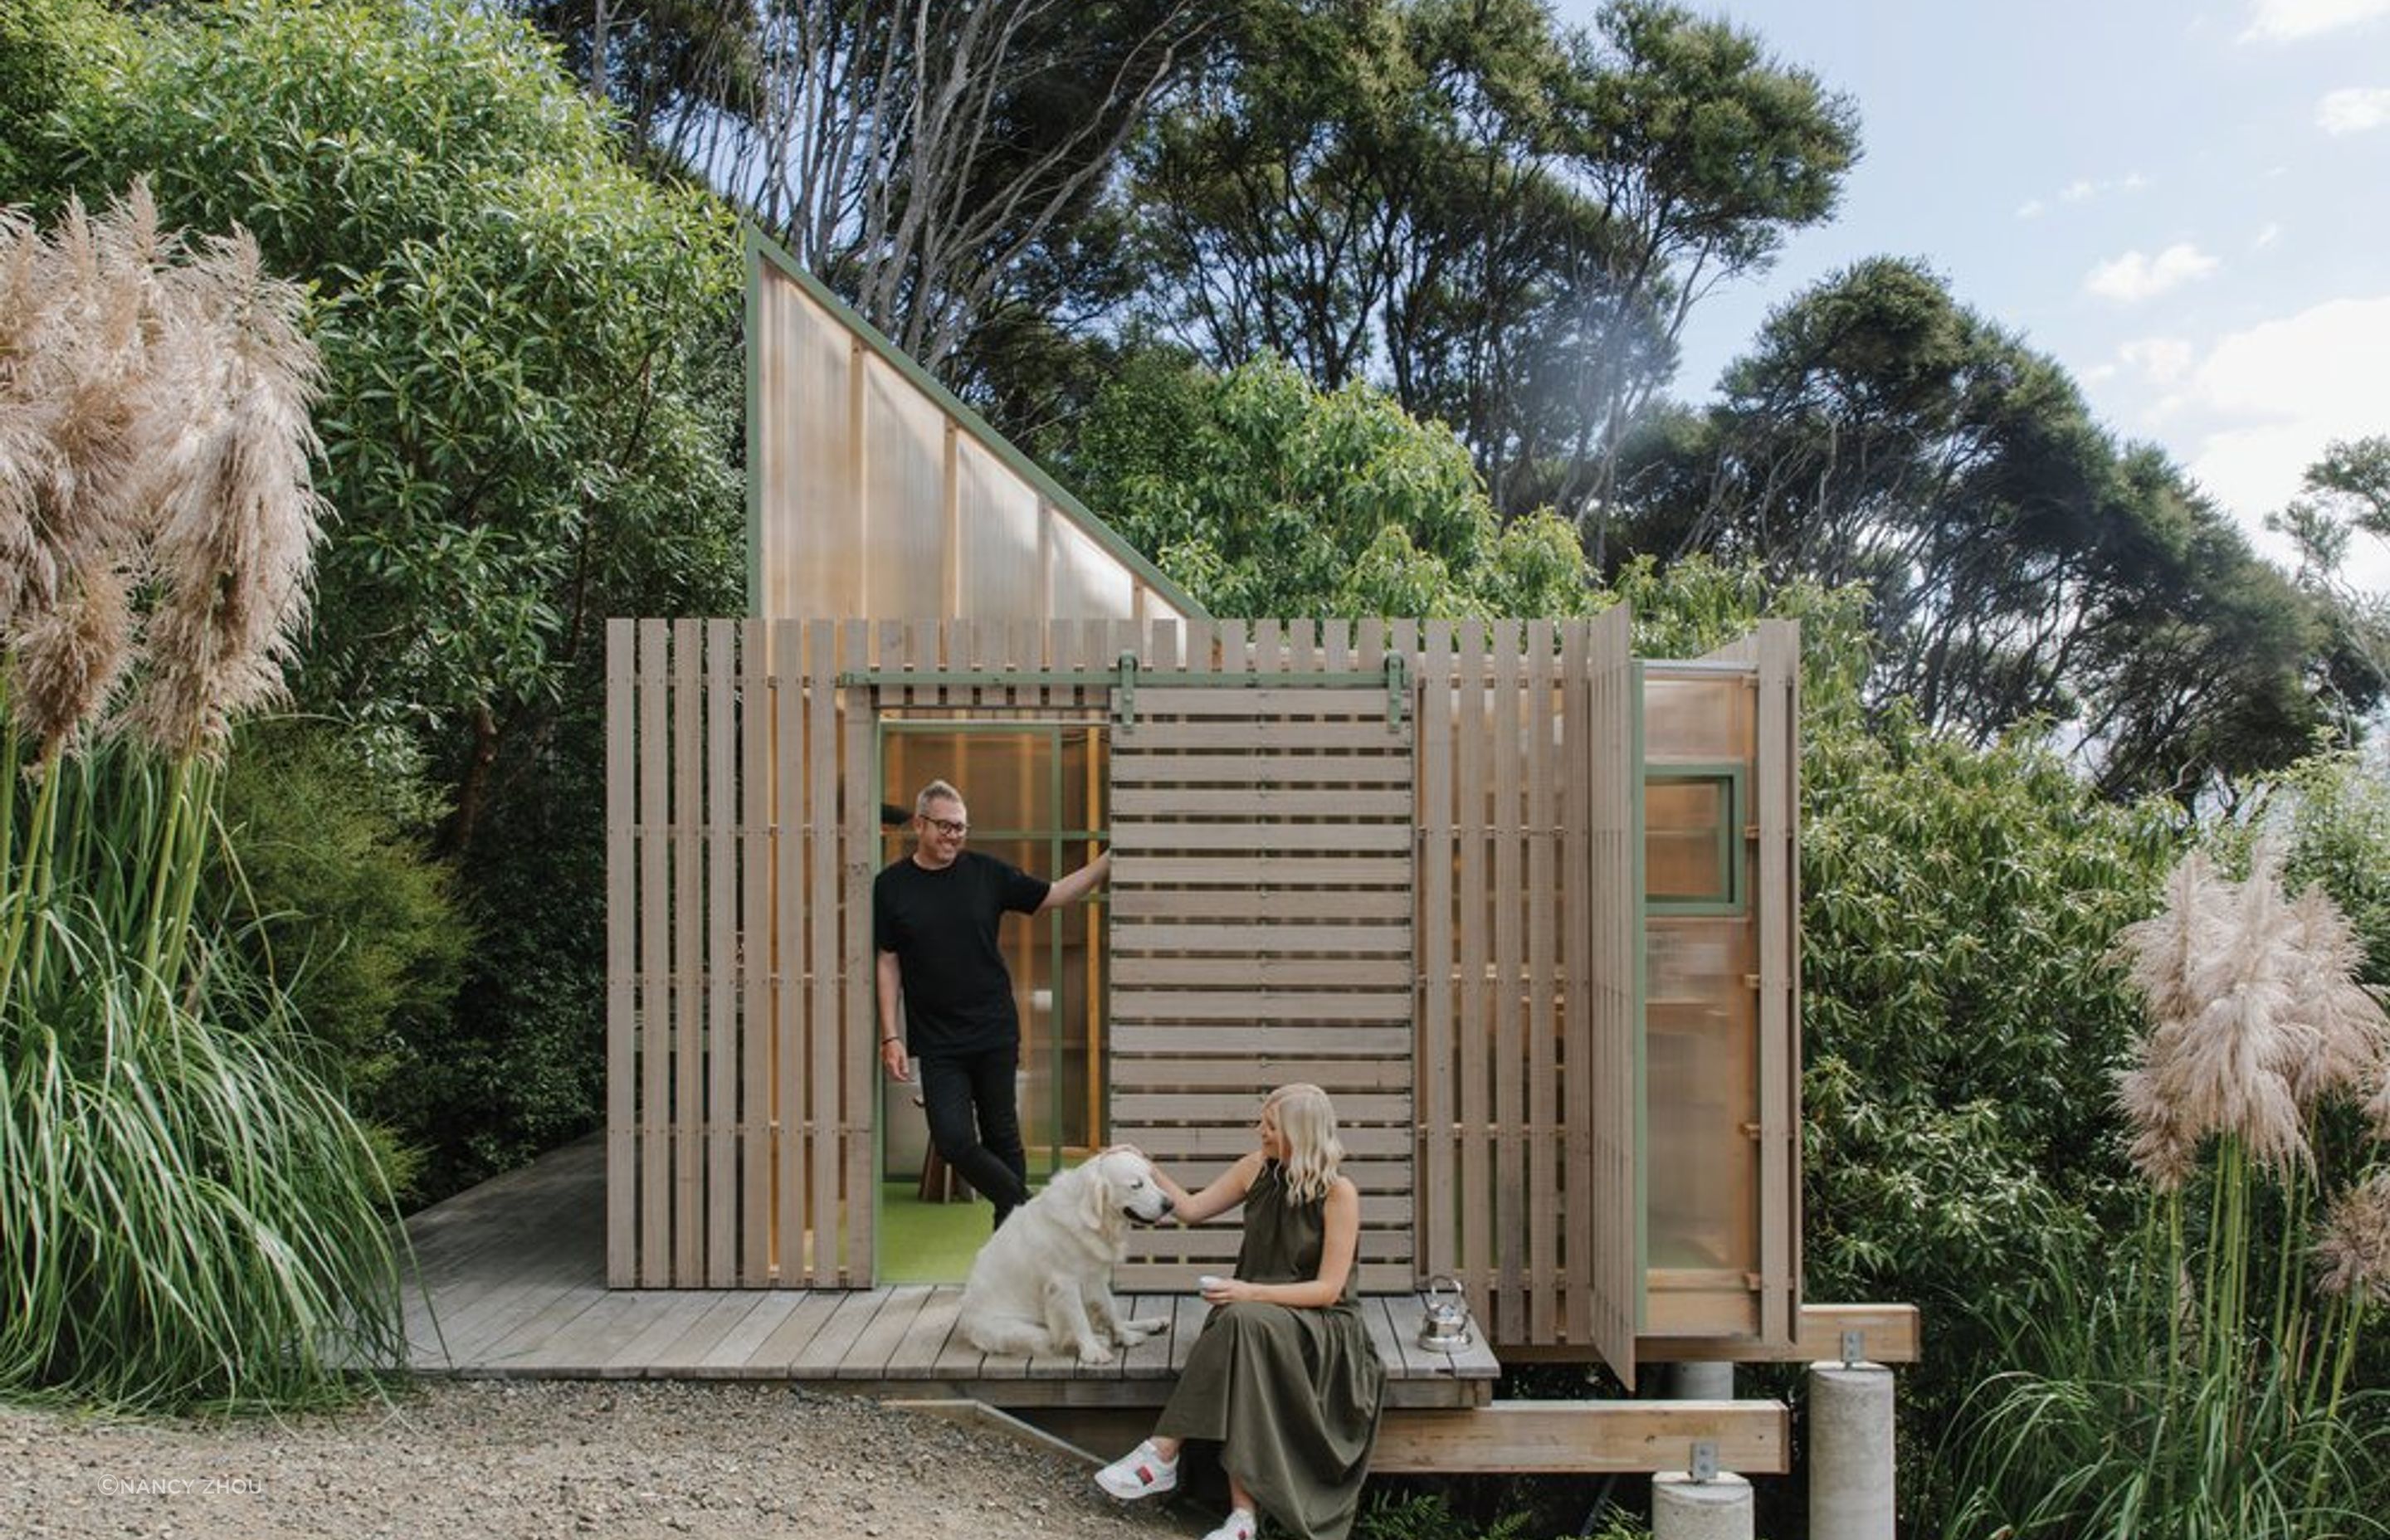 By day, the timber screen filters light and views to provide a constant connection to the surrounding bush when inside.